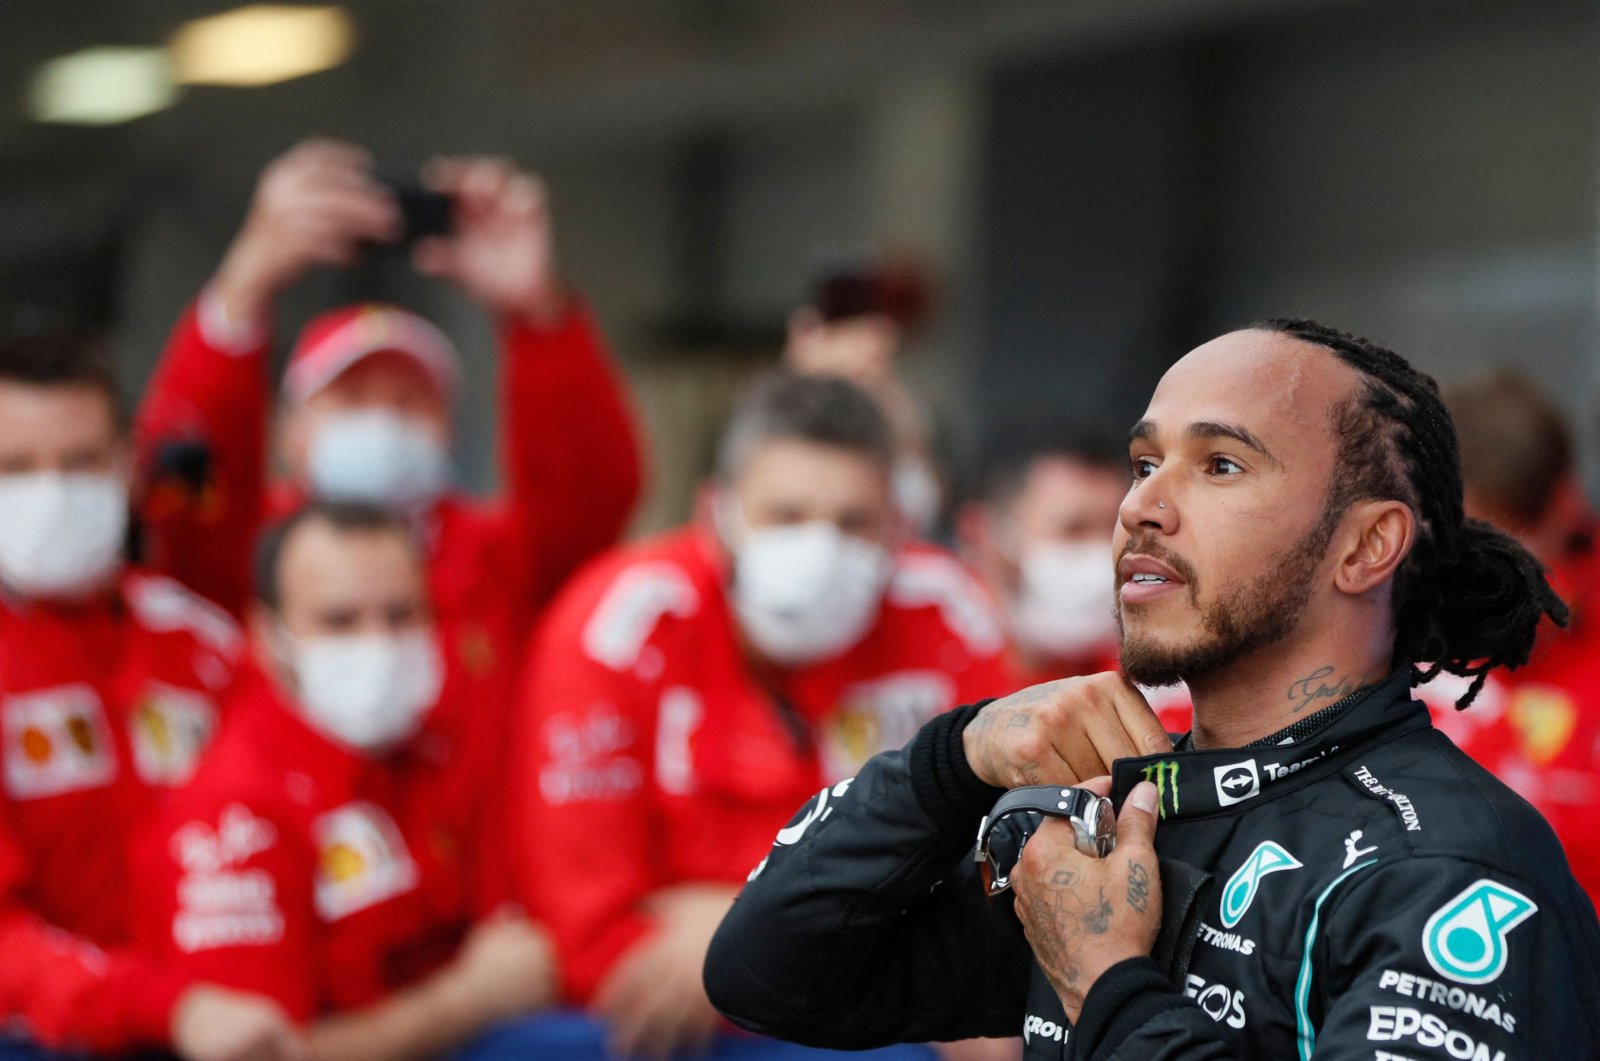 Mercedes driver Lewis Hamilton reacts after the Formula One Russian GP at the Sochi Autodrom circuit, in Sochi, Russia, Sept. 26, 2021. (AFP Photo)